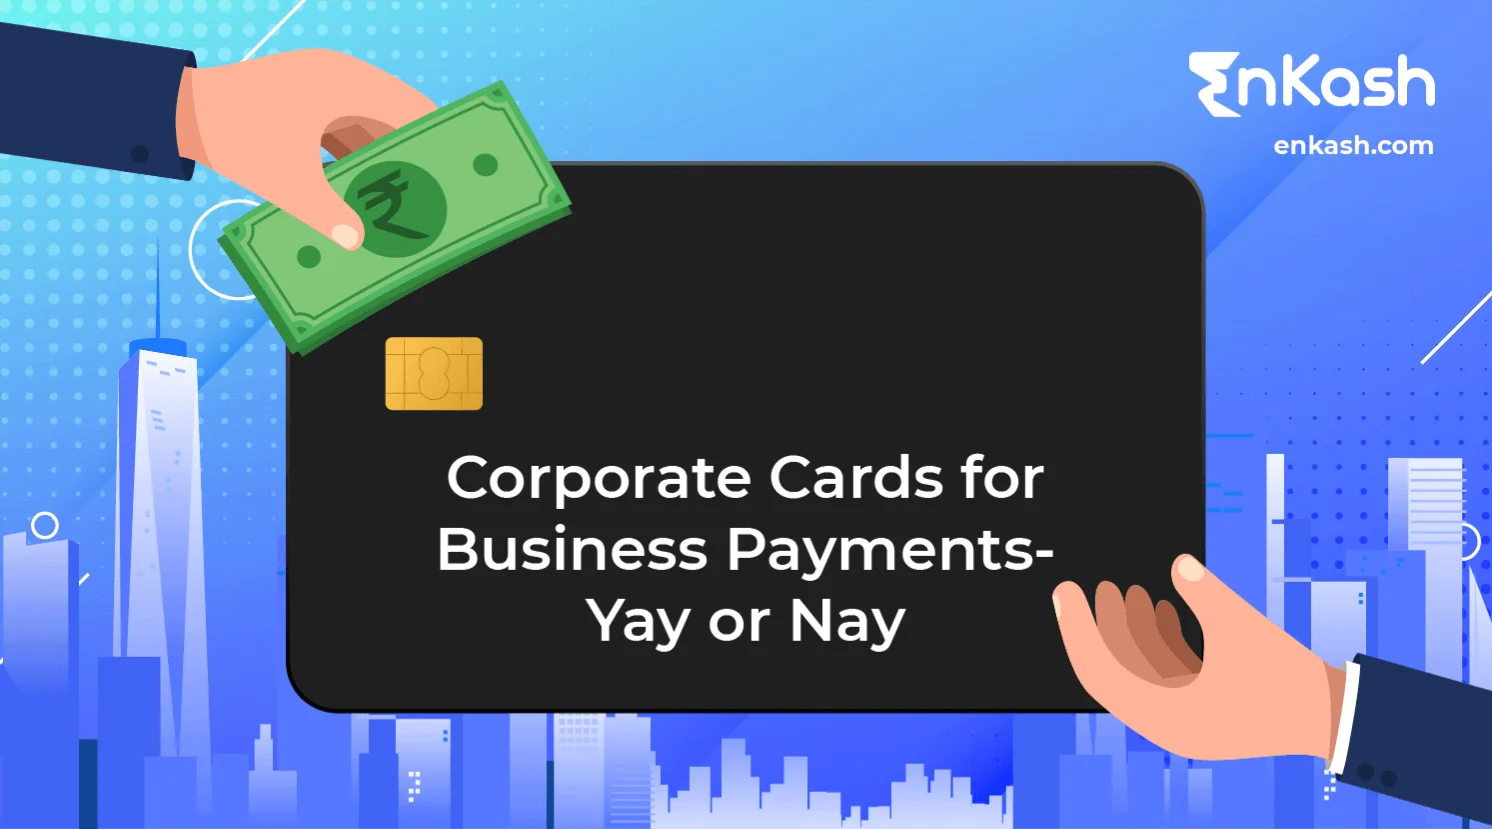 Corporate Cards for Business Payments